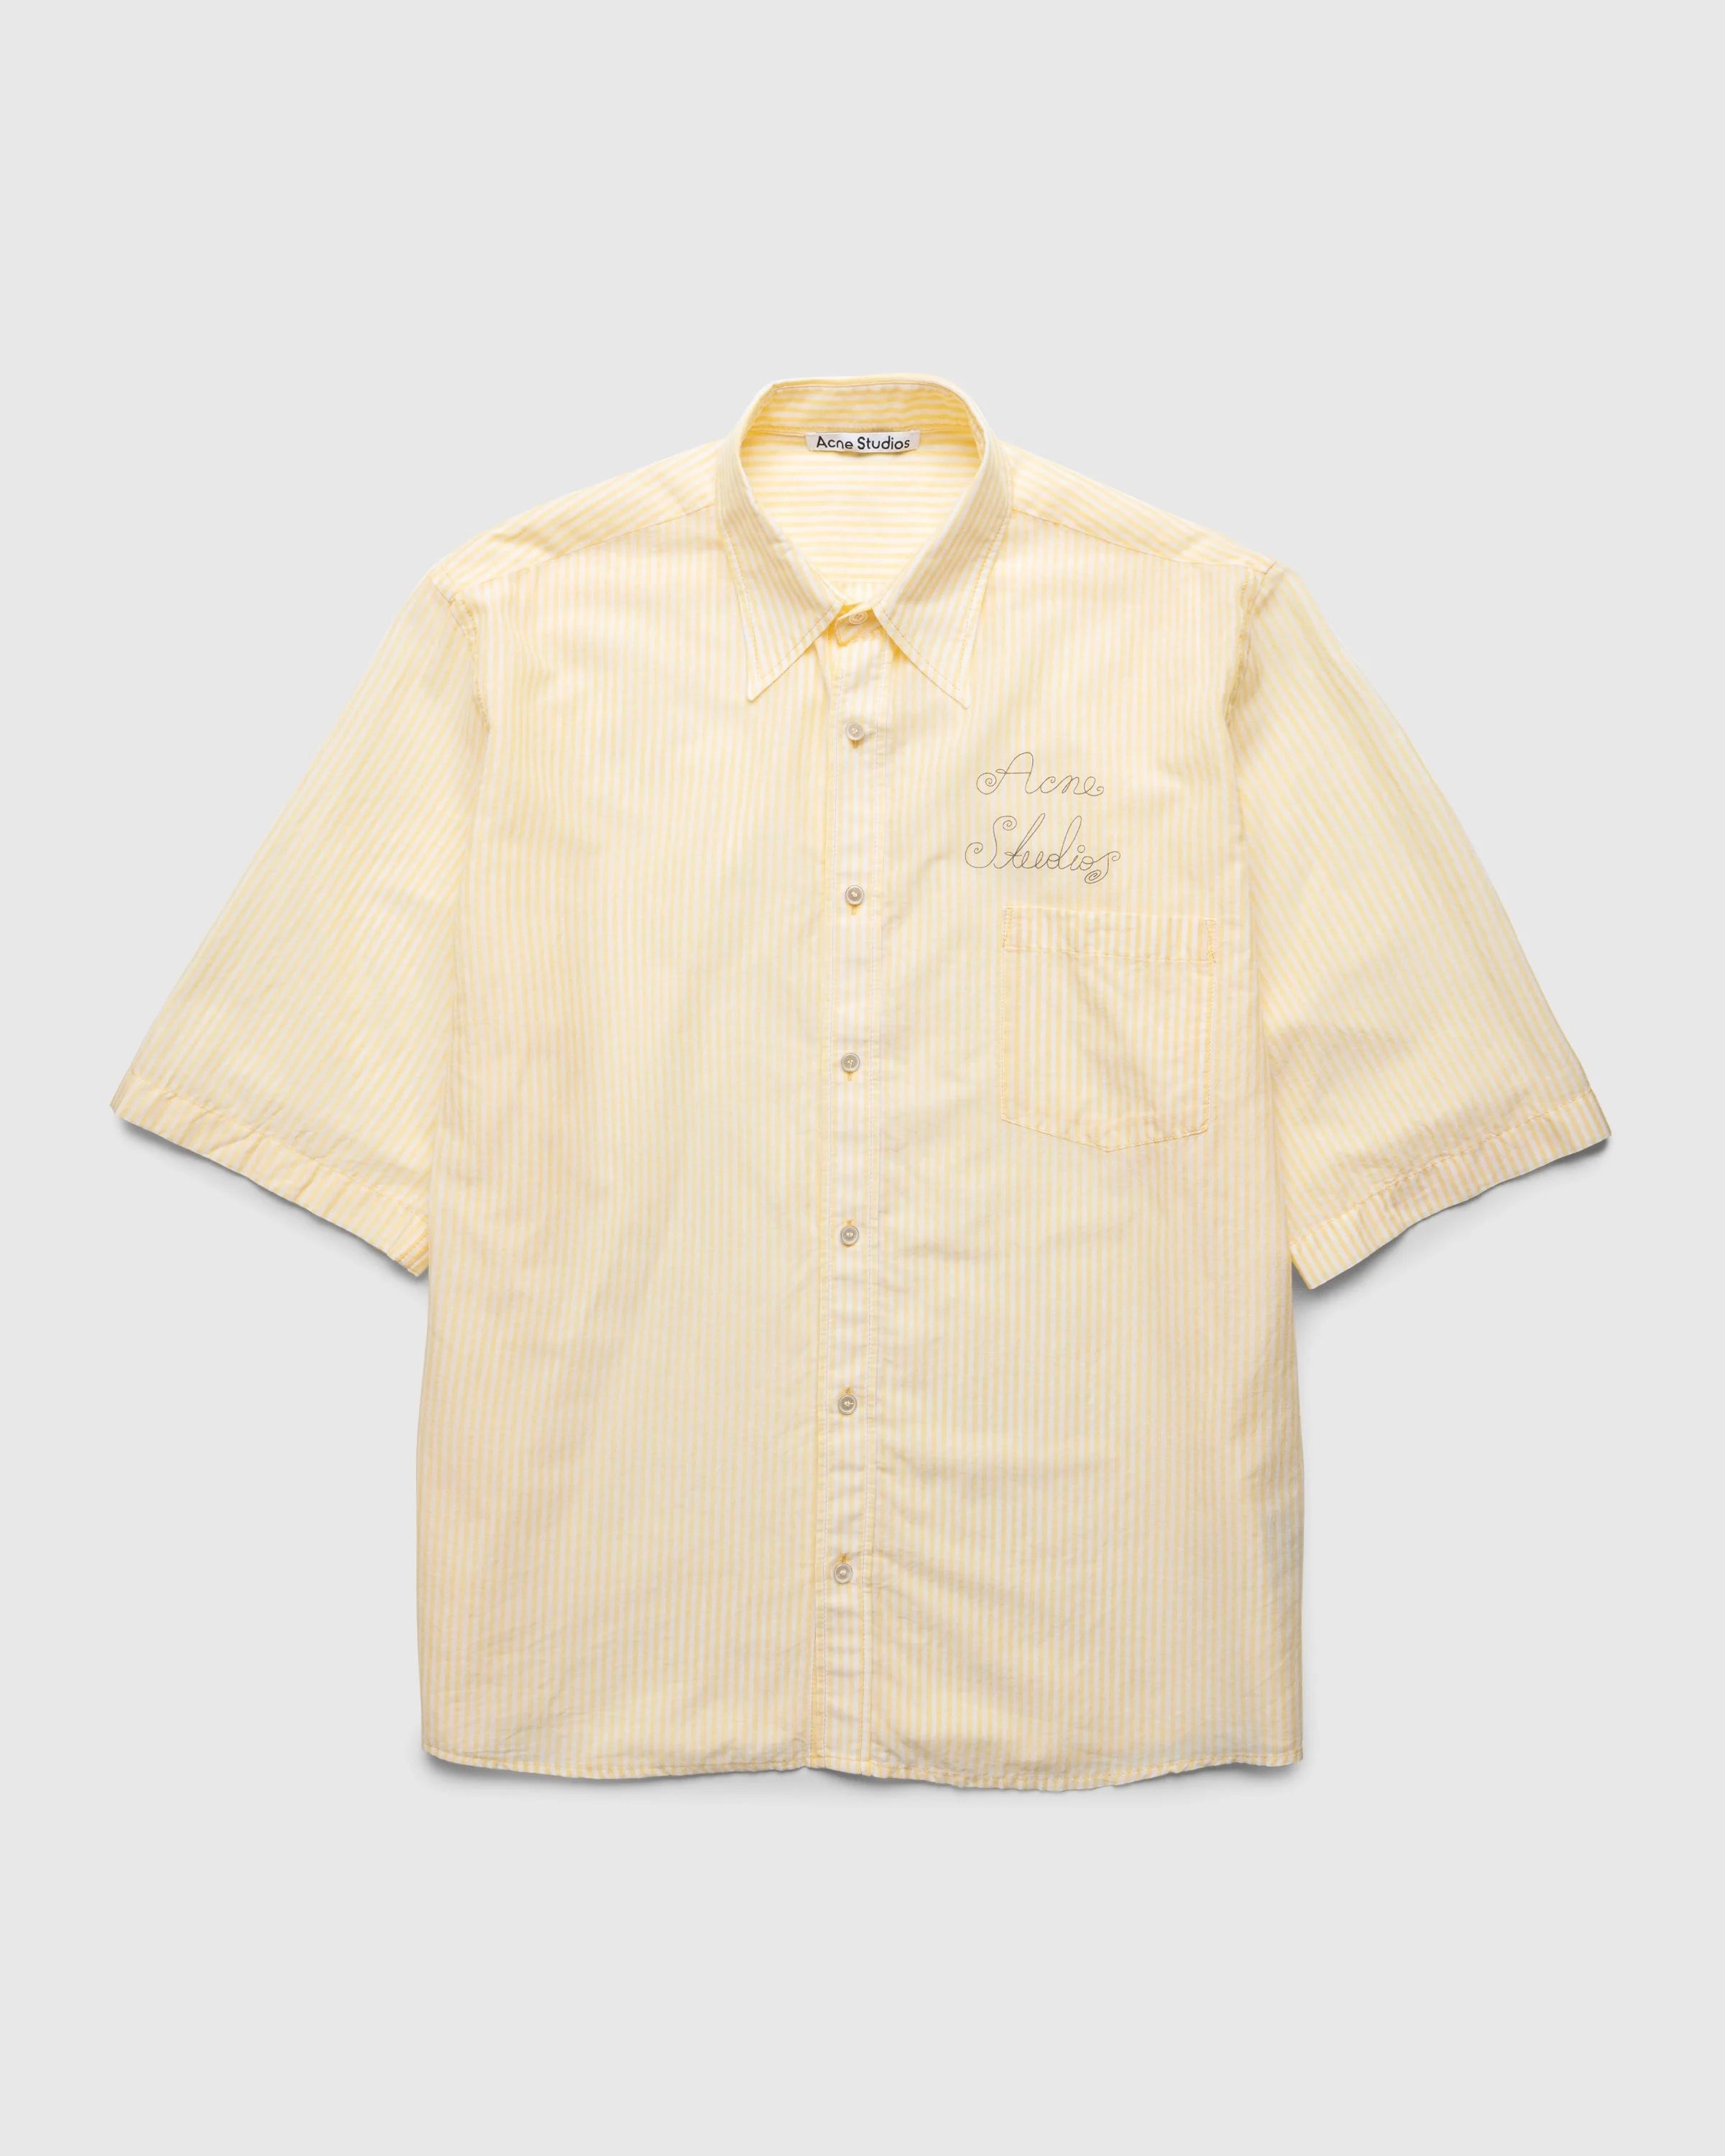 ACNE STUDIOS - YELLOW AND WHITE SHORT-SLEEVED SHIRT - LE LABO STORE